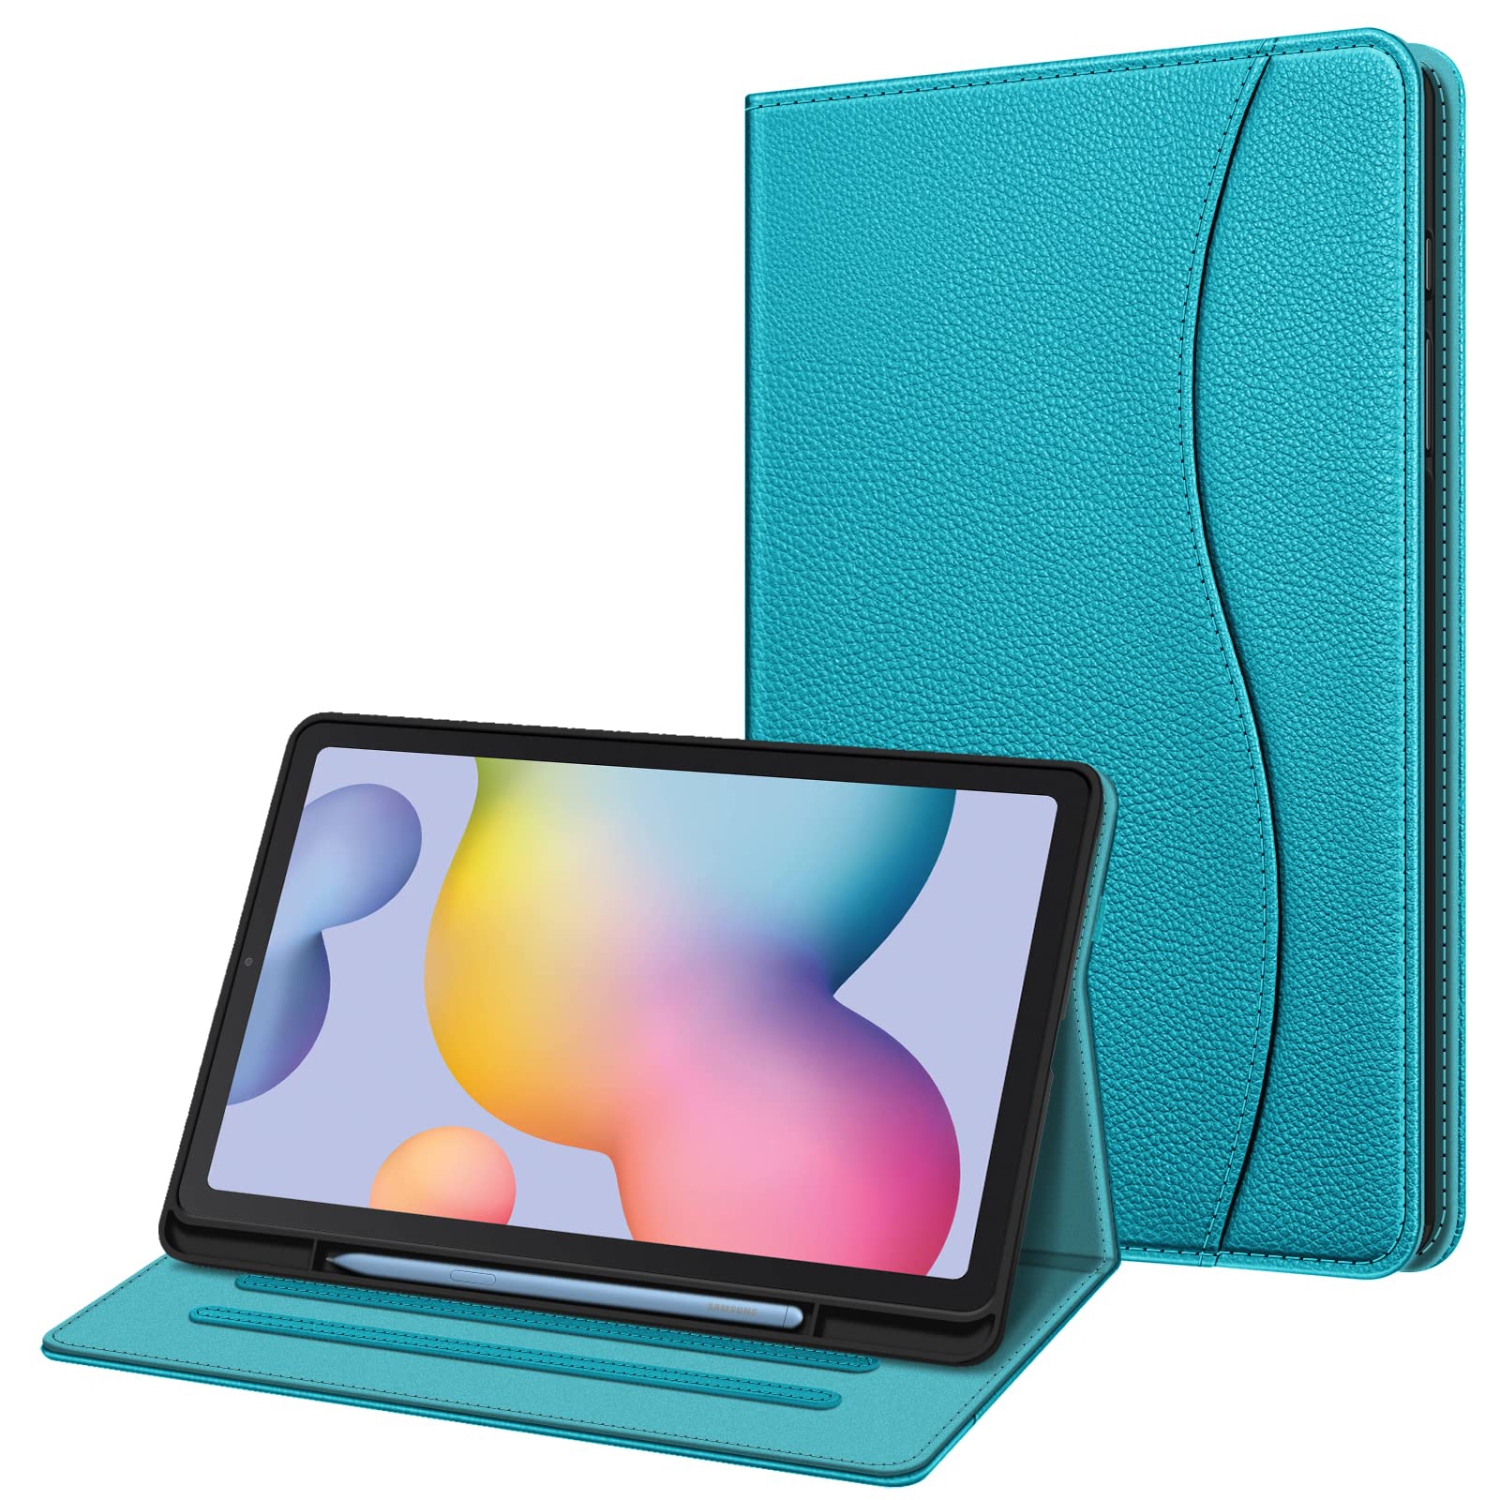 Samsung Galaxy Tab S6 Lite 10.4 Inch 2022/2020 Model (SM-P610/P613/P615/P619) with S Pen Holder, Multi-Angle Viewing Soft TPU Back Cover with Pocket Auto Wake/Sleep